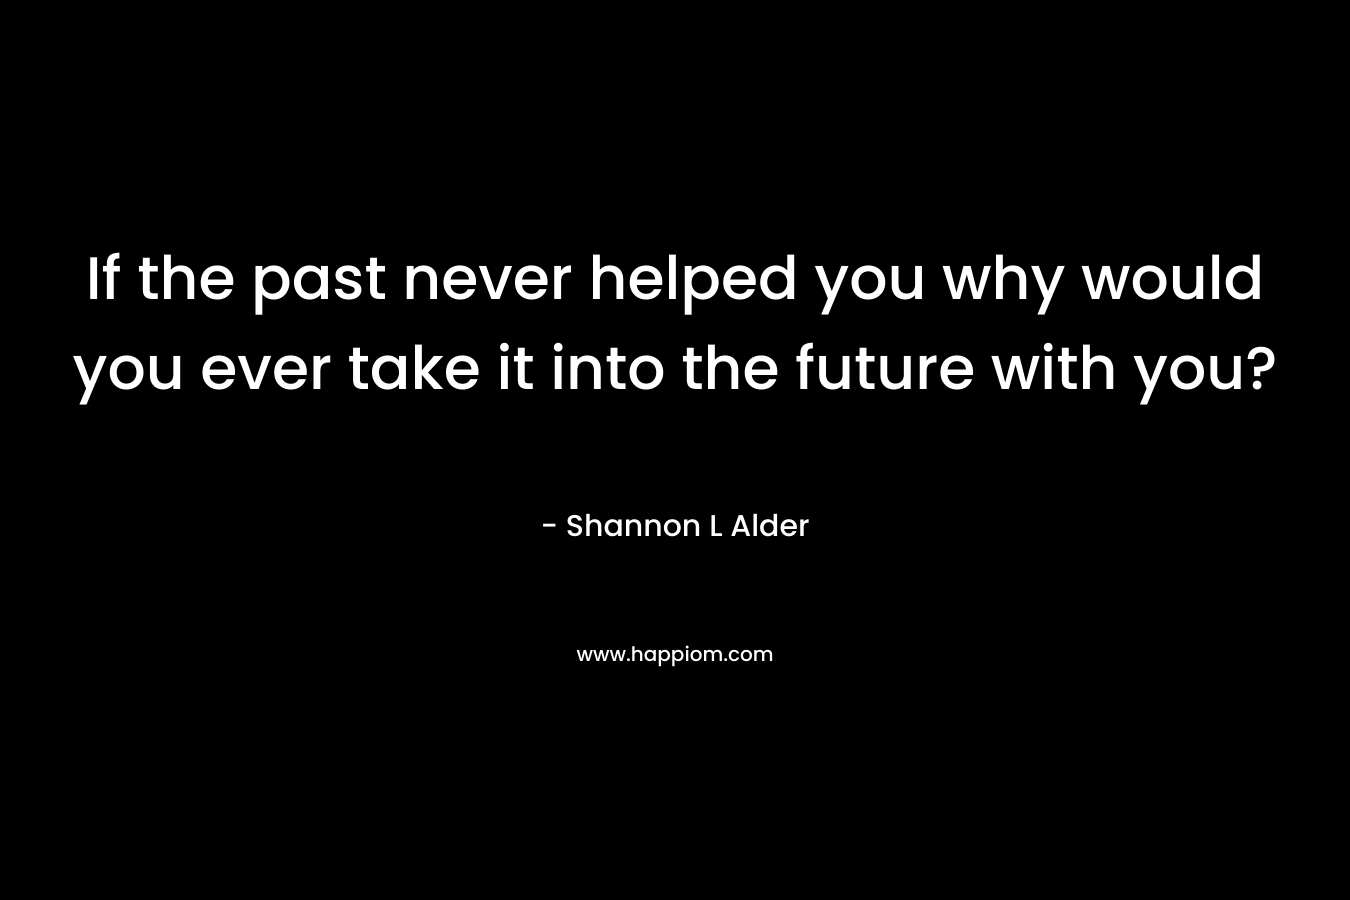 If the past never helped you why would you ever take it into the future with you?